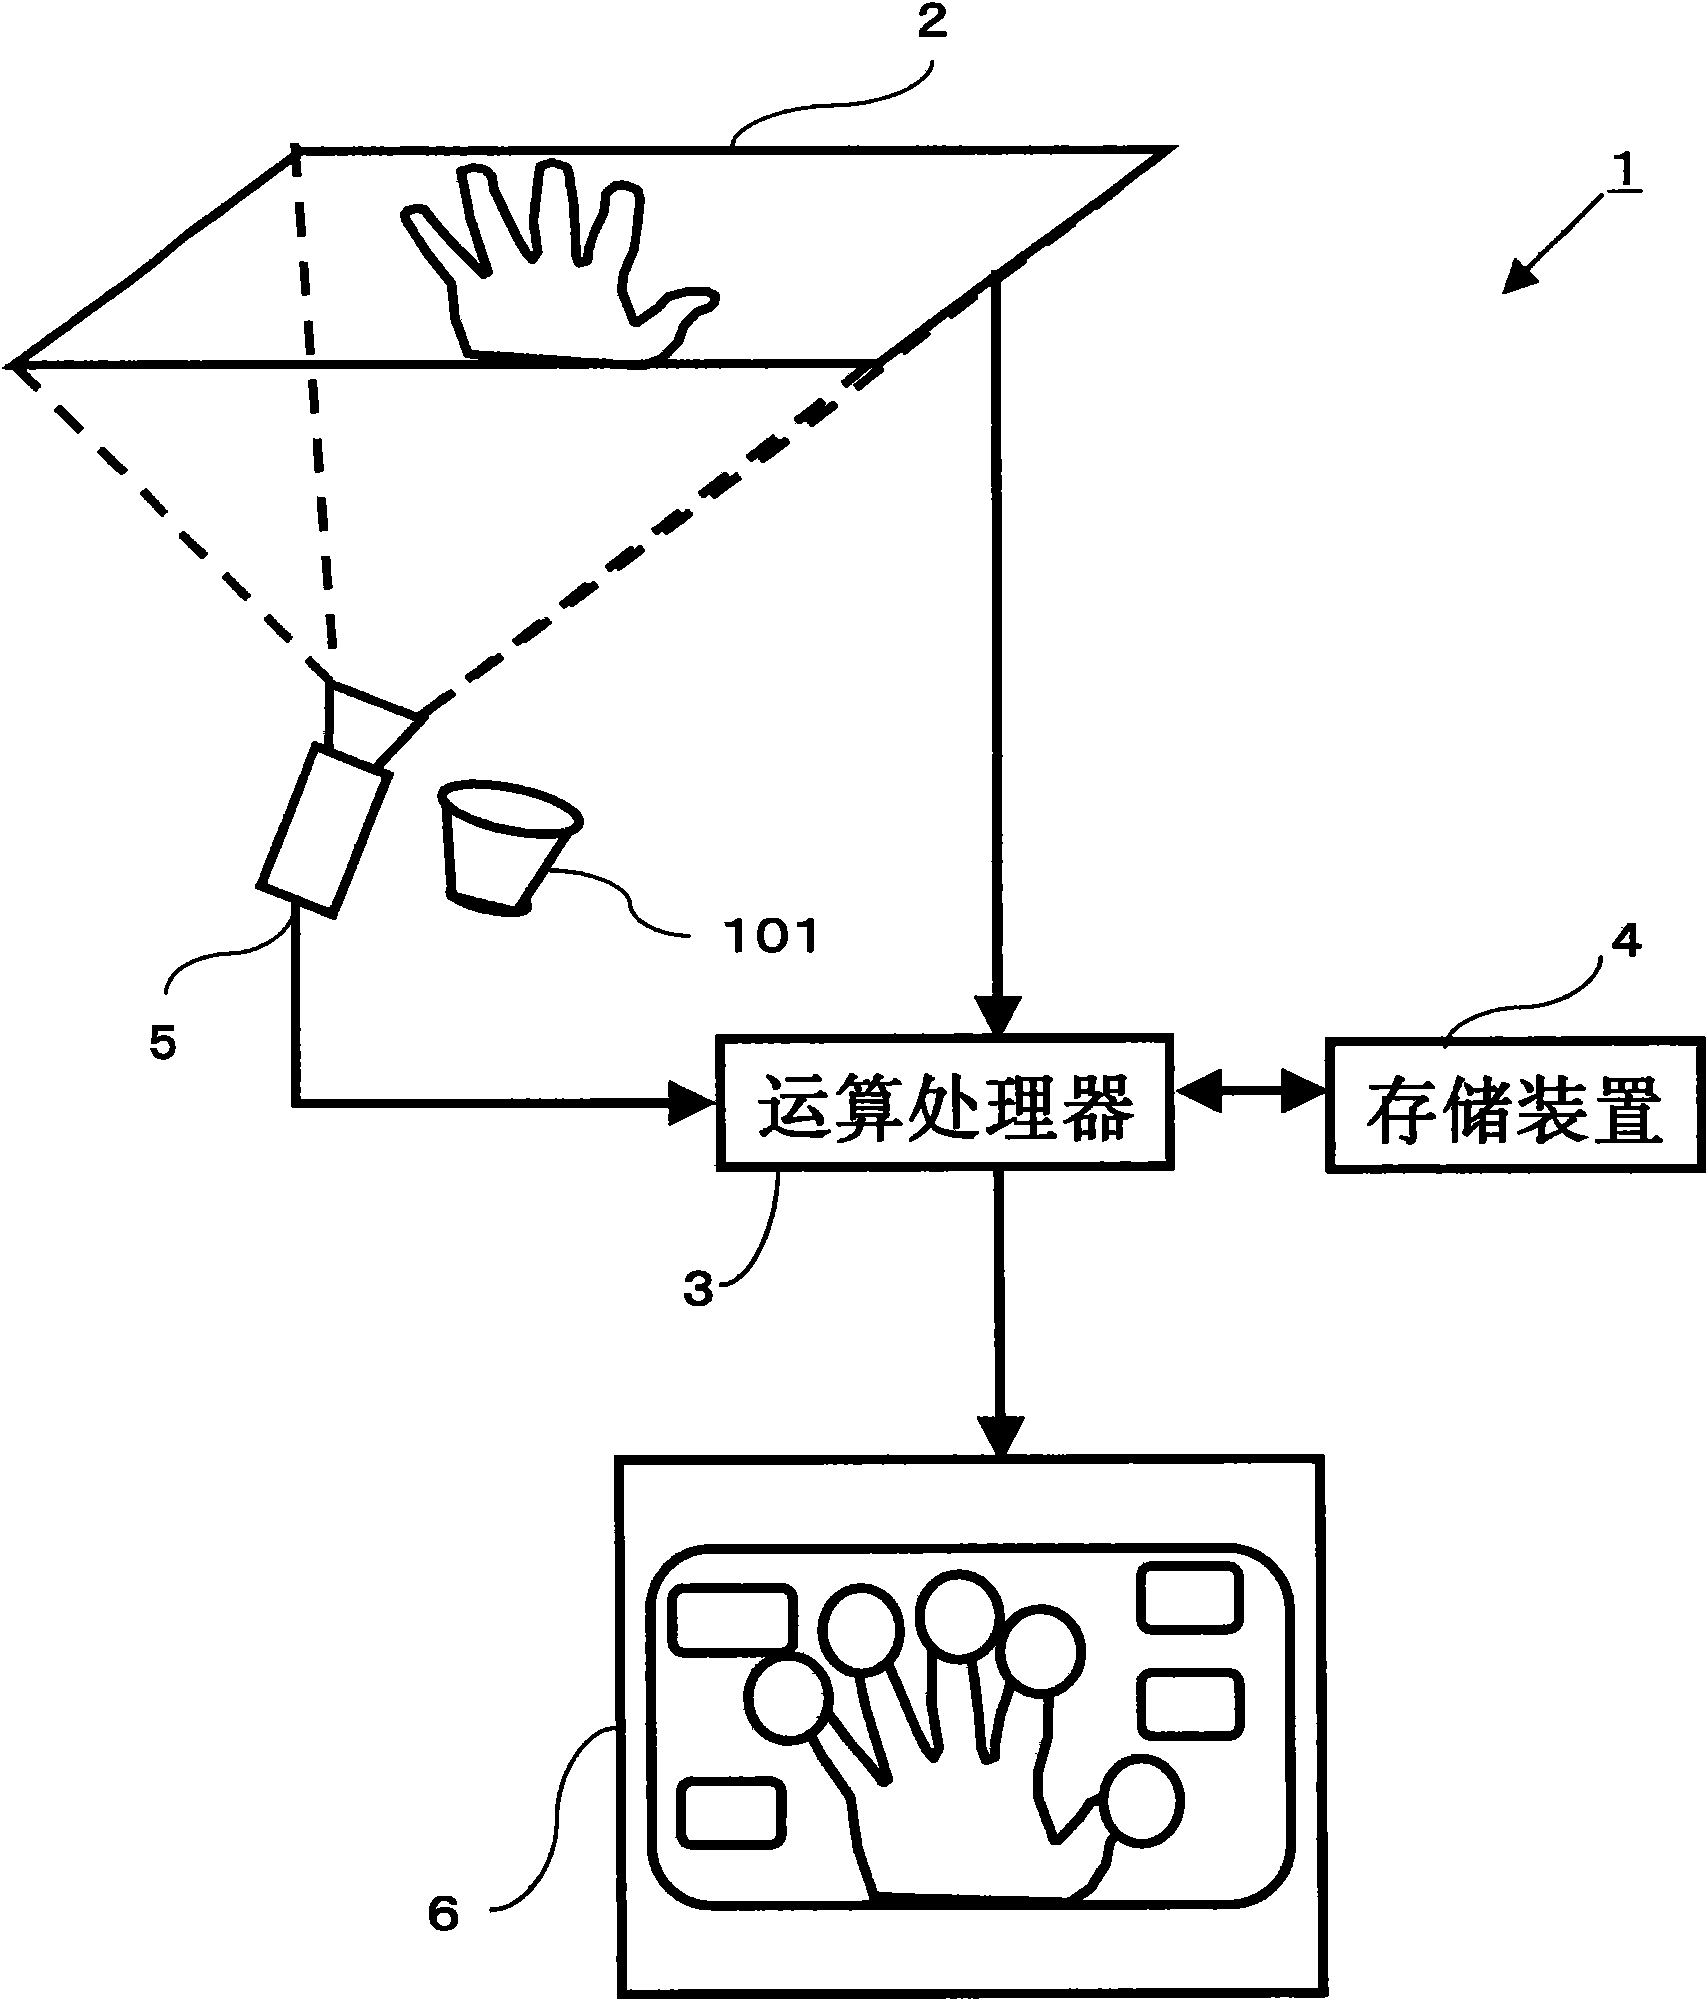 User interface device